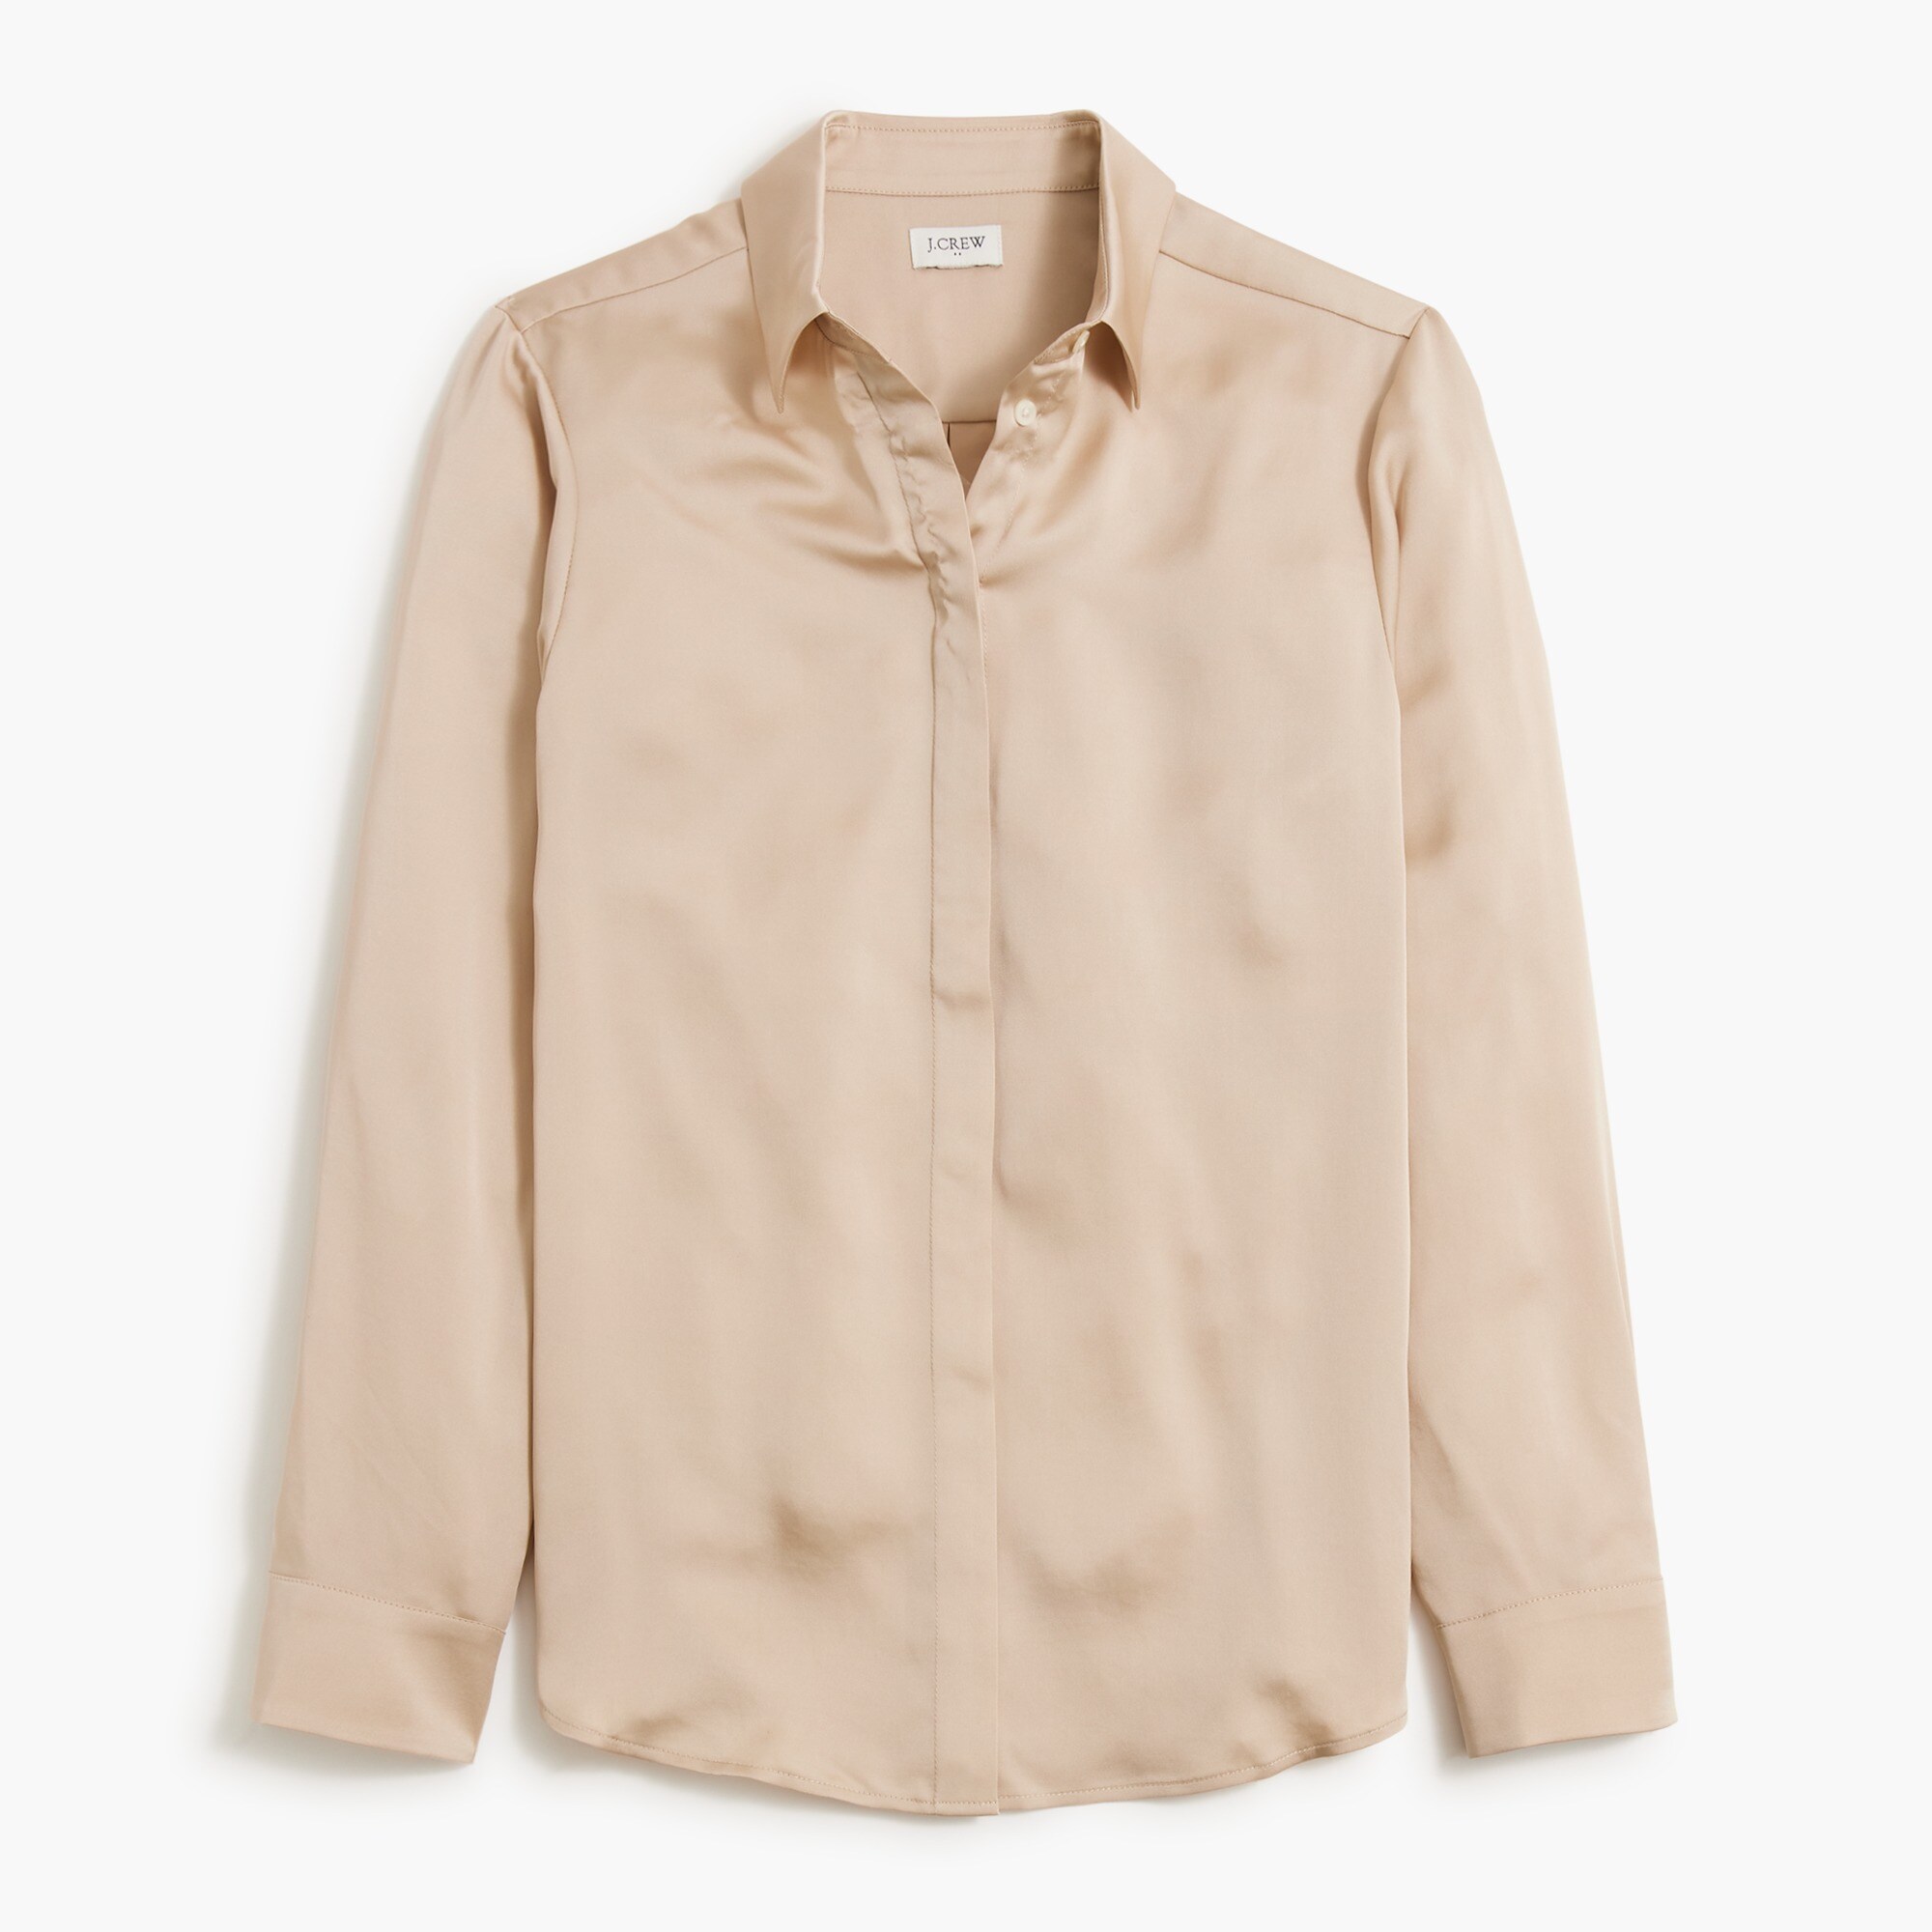  Drapey satin button-up top